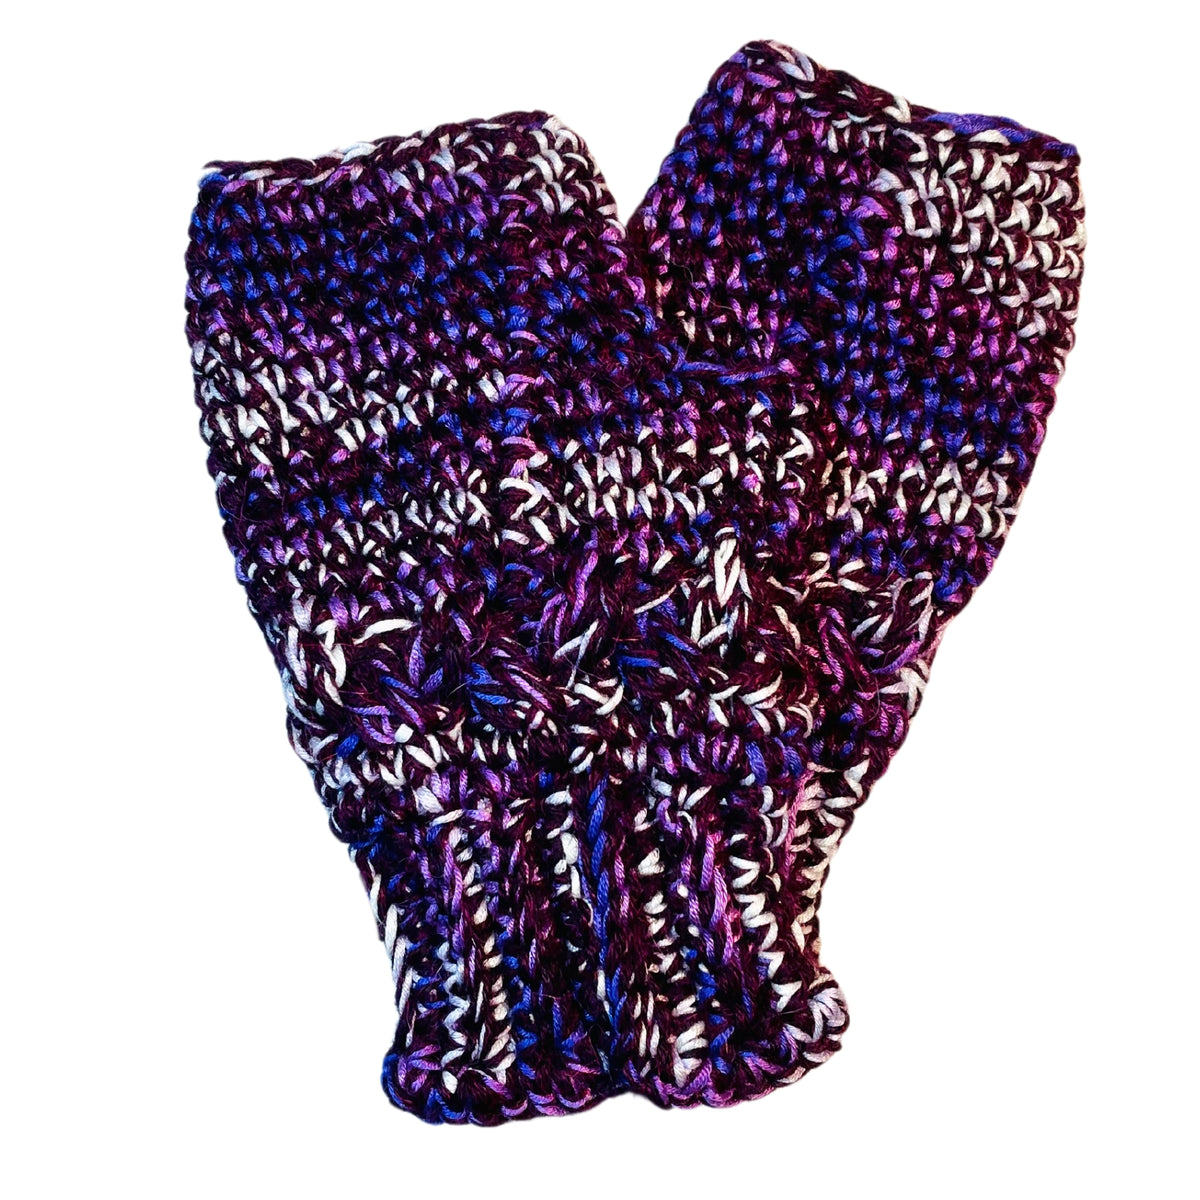 Alpacas of Montana deep purple, bright purple violet, and white colored cozy soft warm handmade knitted crochet fingerless celtic wristie mittens made in Montana out of alpaca yarn and bamboo yarn.